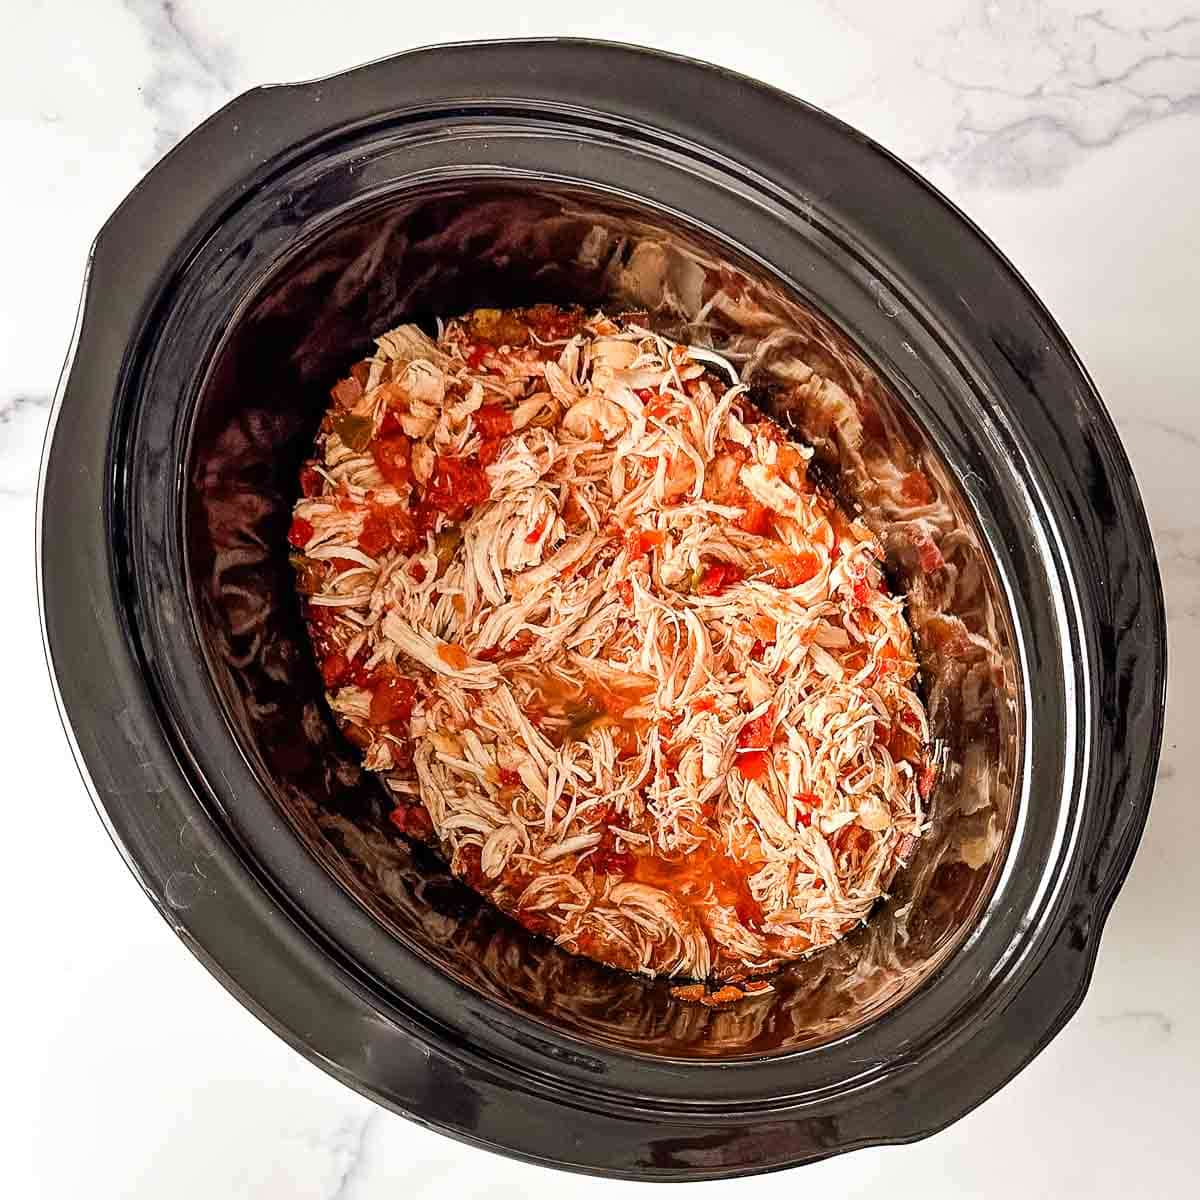 A crock pot filled with shredded chicken and salsa.